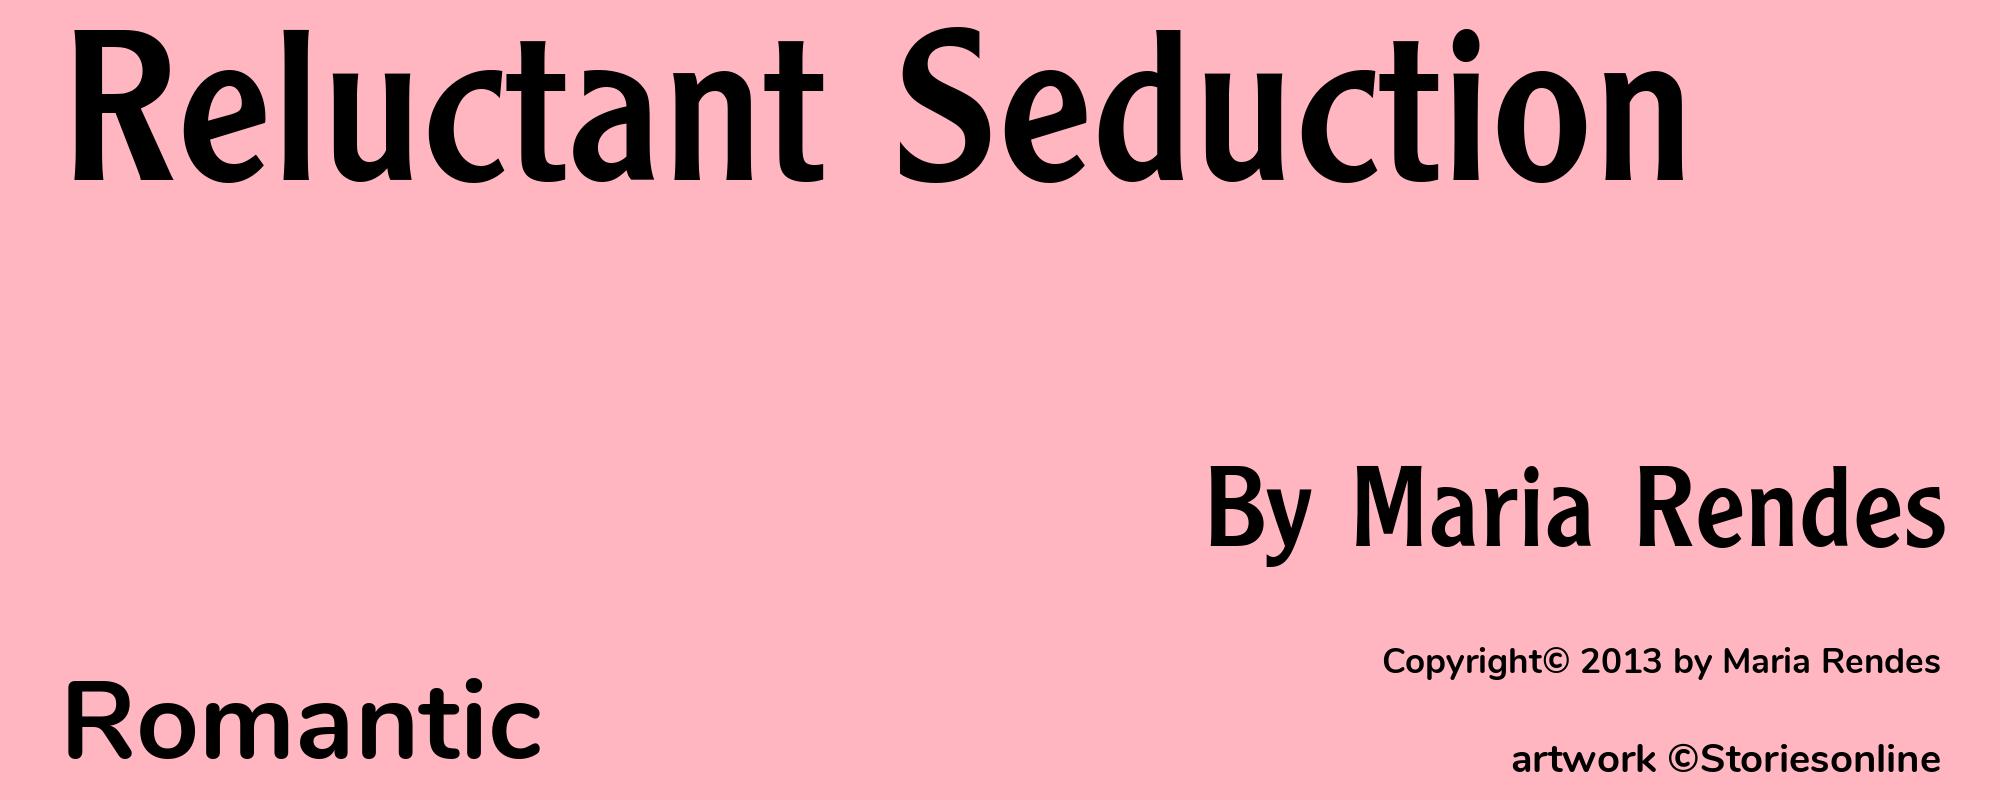 Reluctant Seduction - Cover